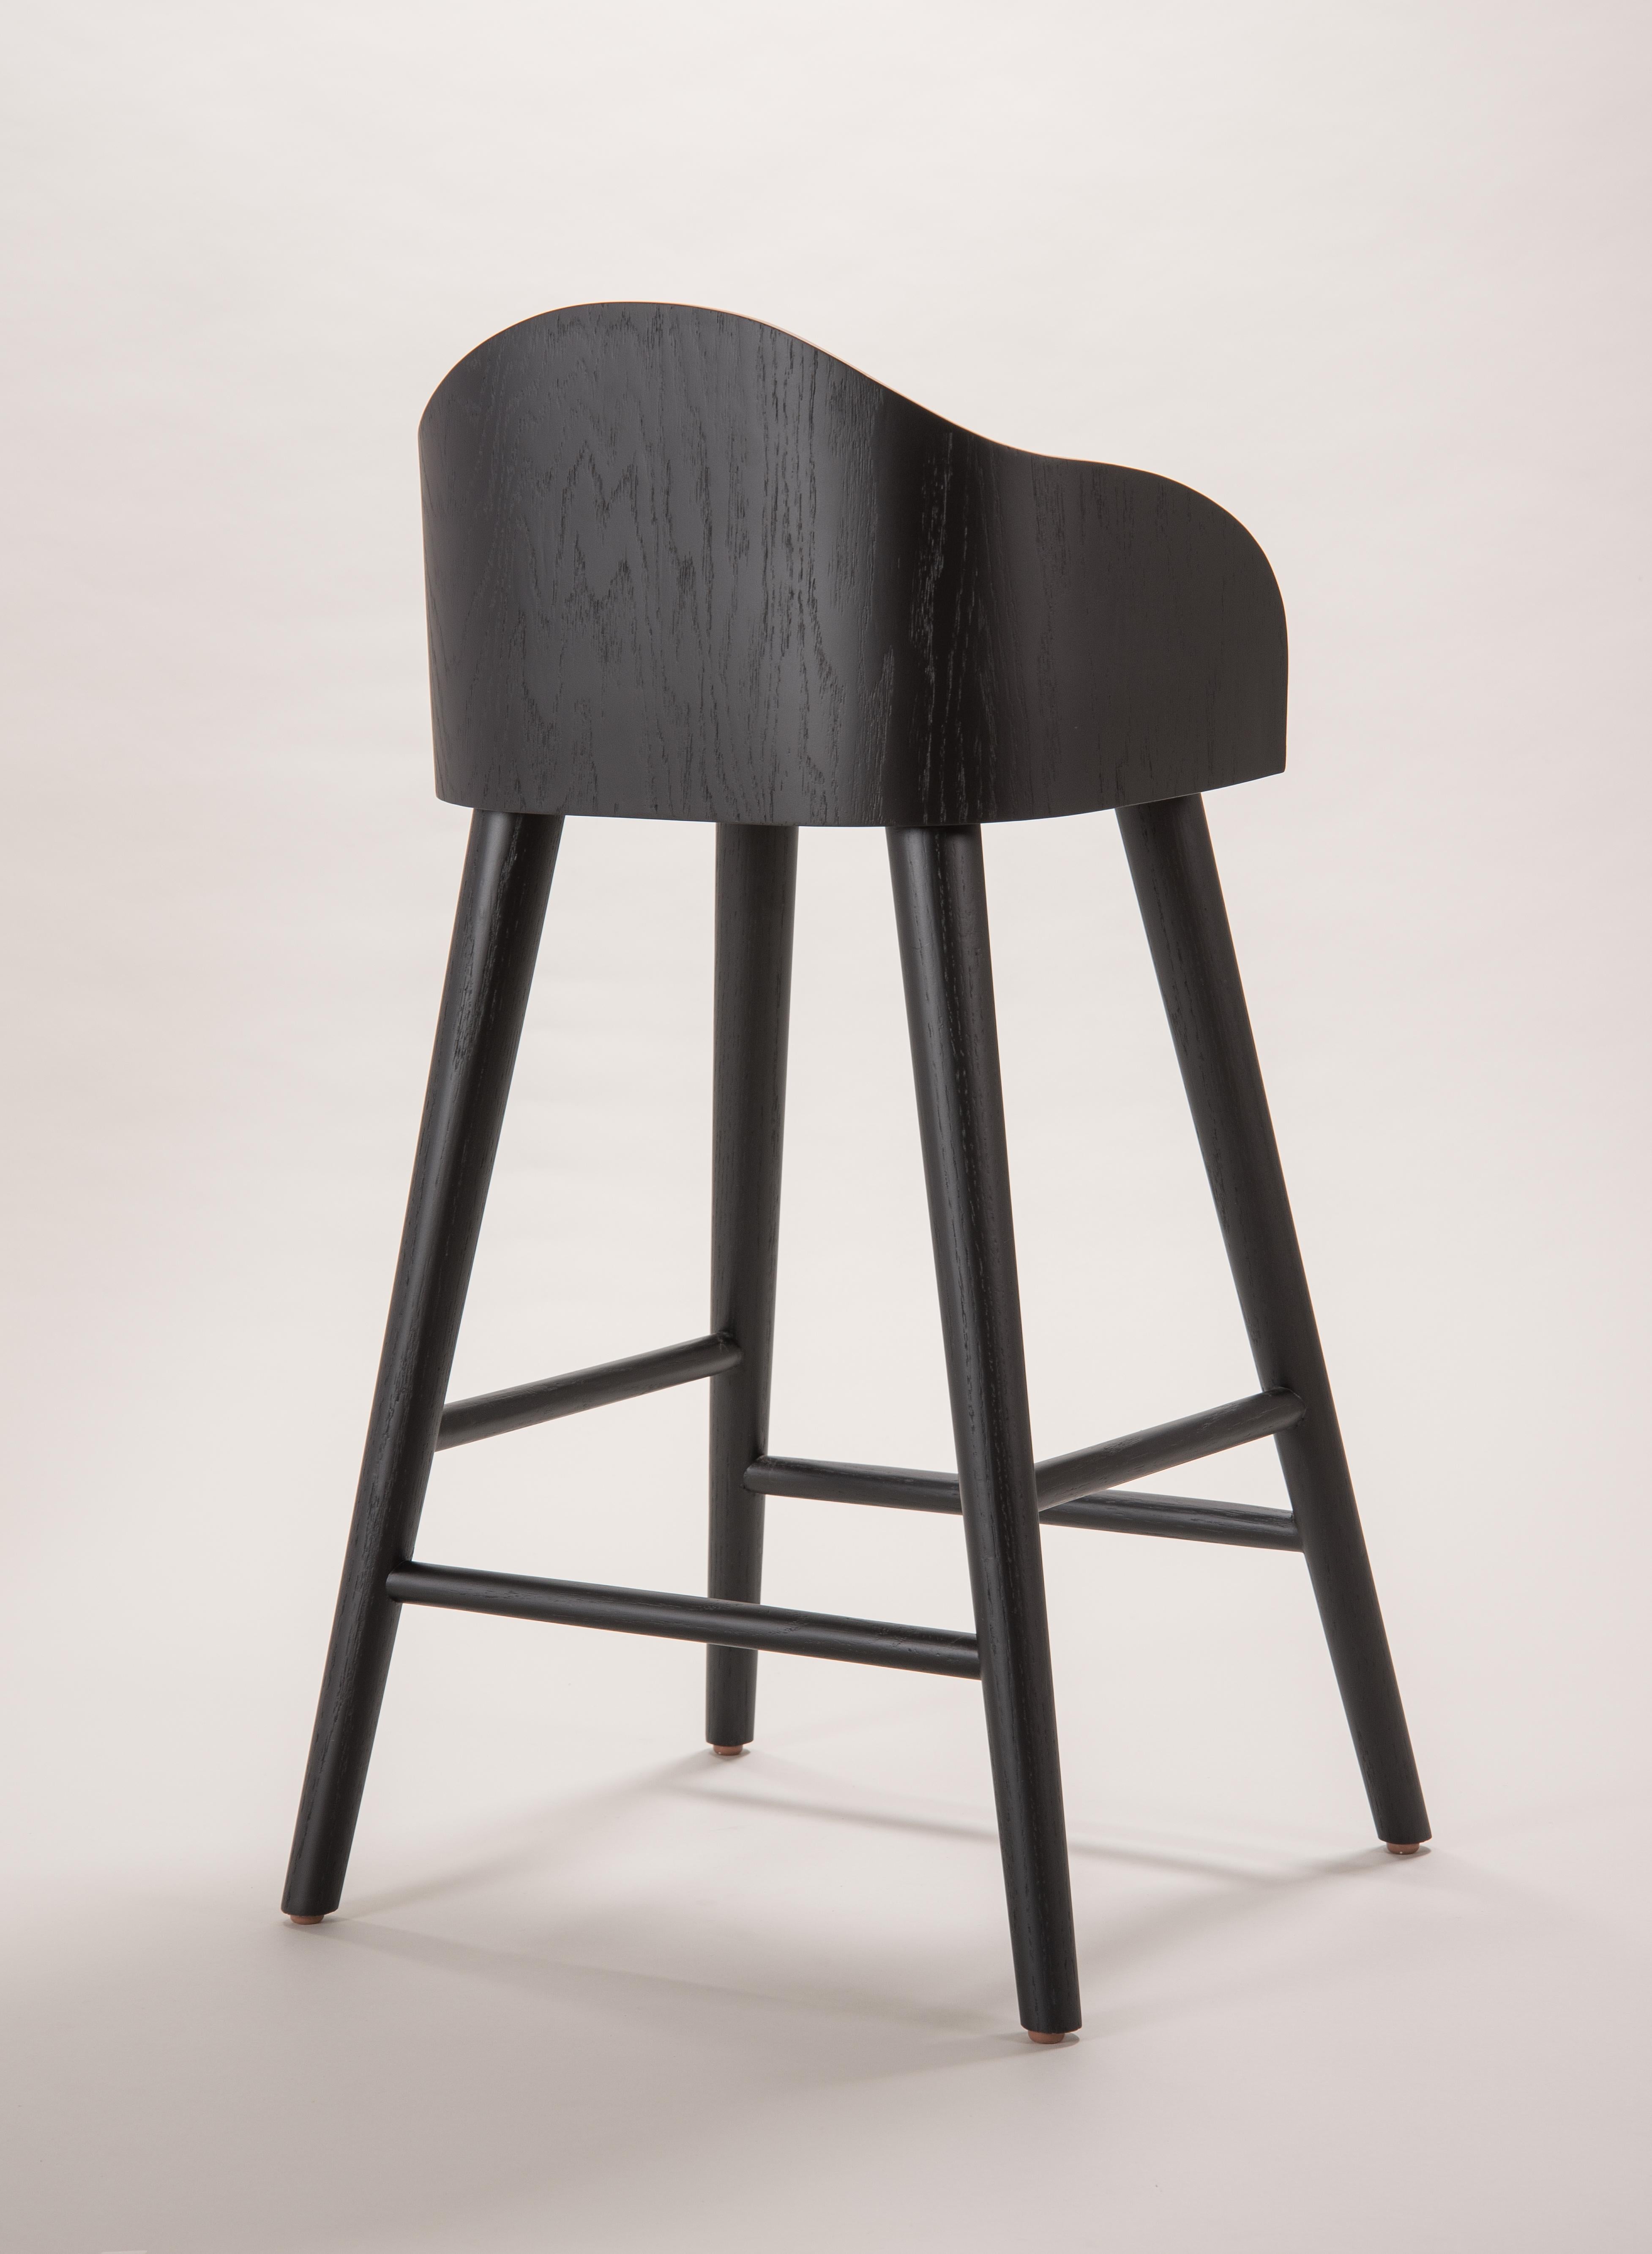 The peaceful movement of a wave flows by the stylized lines of the stools, refreshing in its organic design made with oak inked in black. Qualities such as definition, symmetry and proportion, allows the Ola stools to be a pleasant contrast to